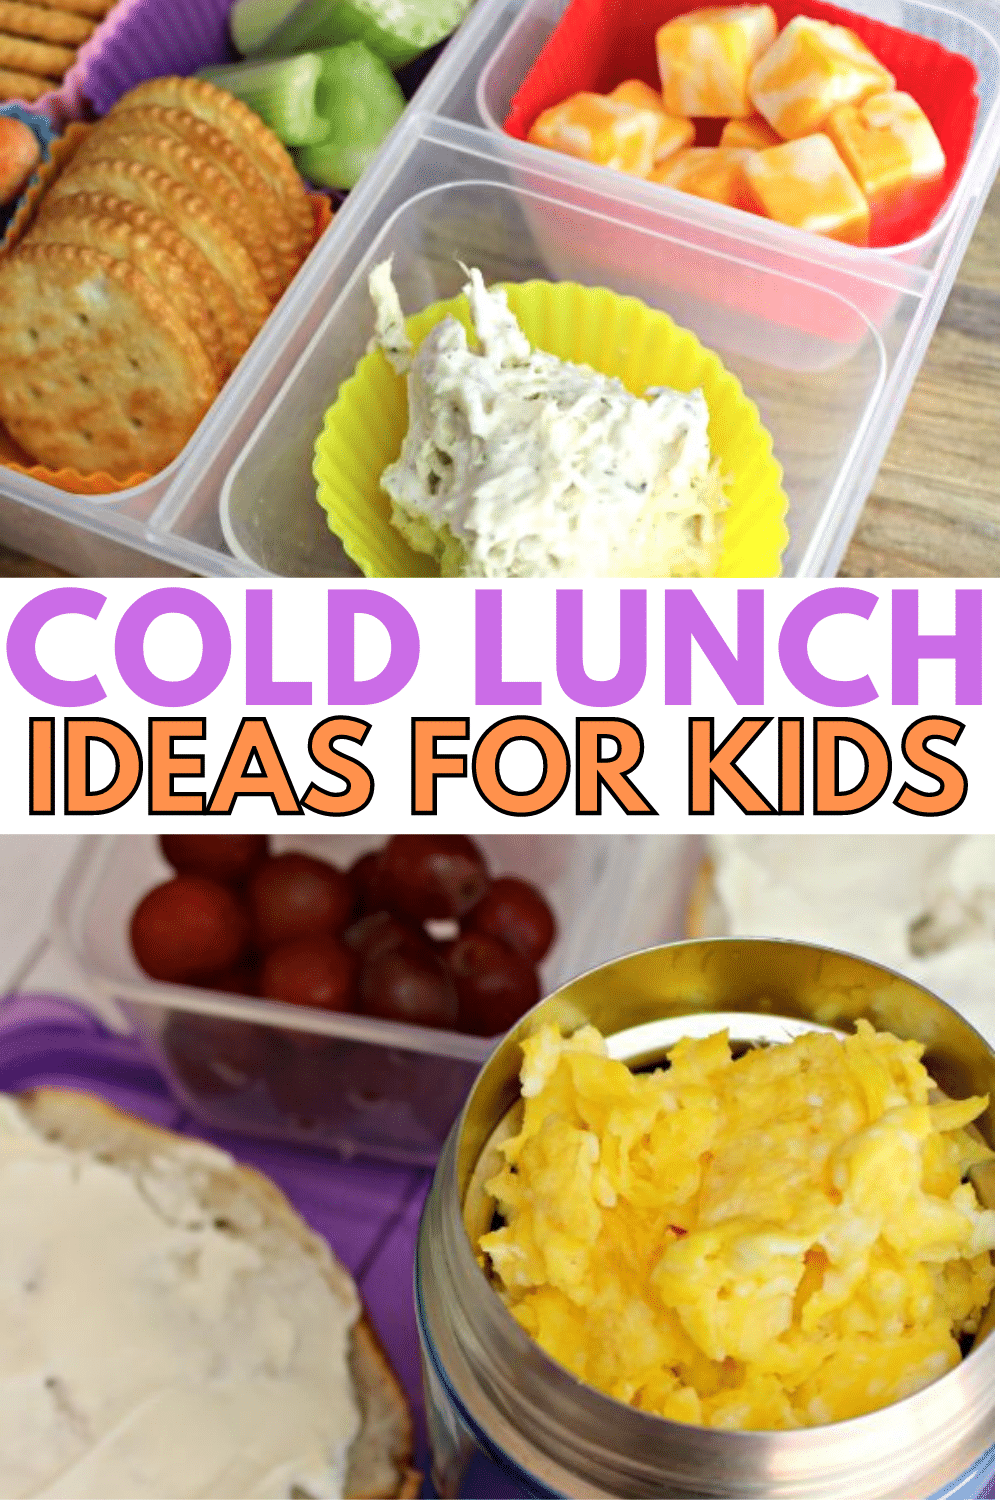 No more boring lunches with these 15 cold lunch ideas for kids. Easy to plan ahead of time and put together in the morning for delicious school lunch. #schoollunch #lunchideas #kidslunch via @wondermomwannab